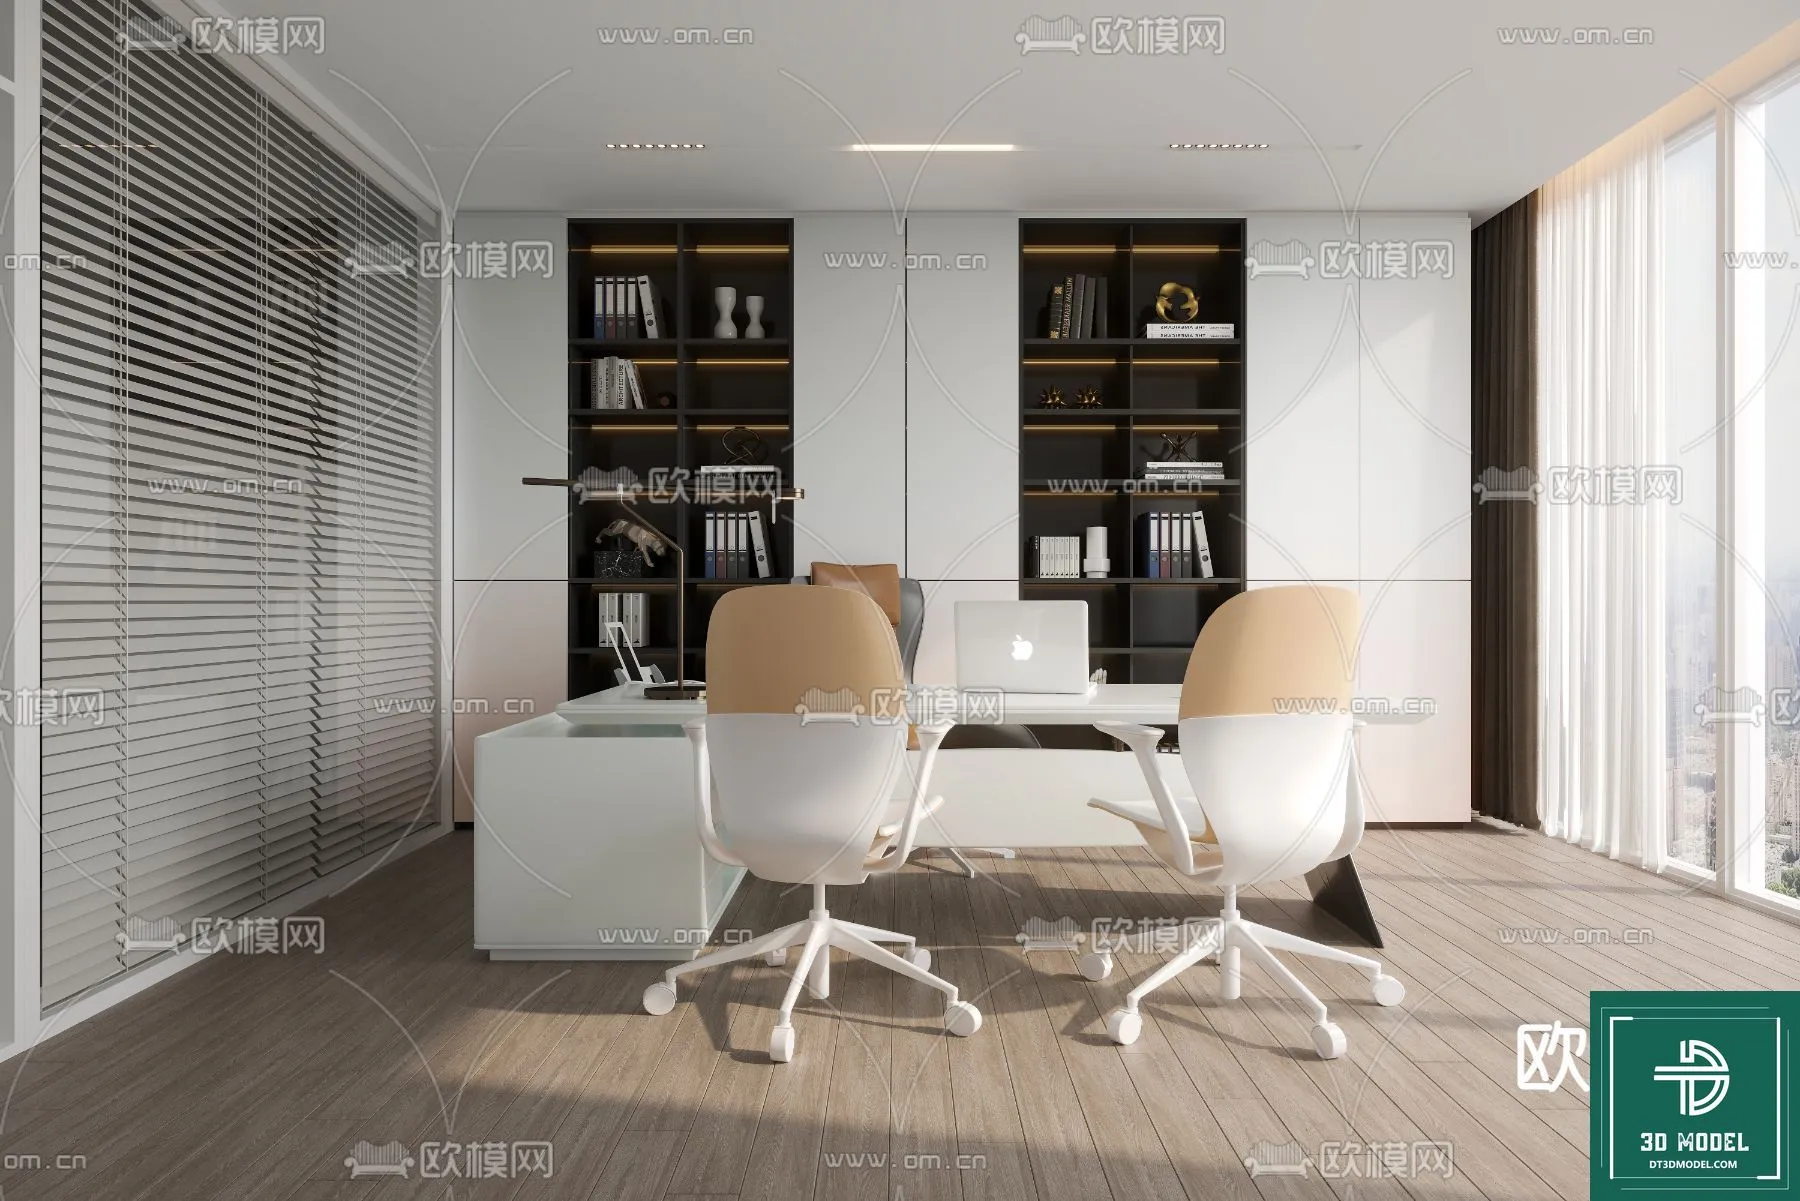 OFFICE ROOM FOR MANAGER – 3DMODEL – 112